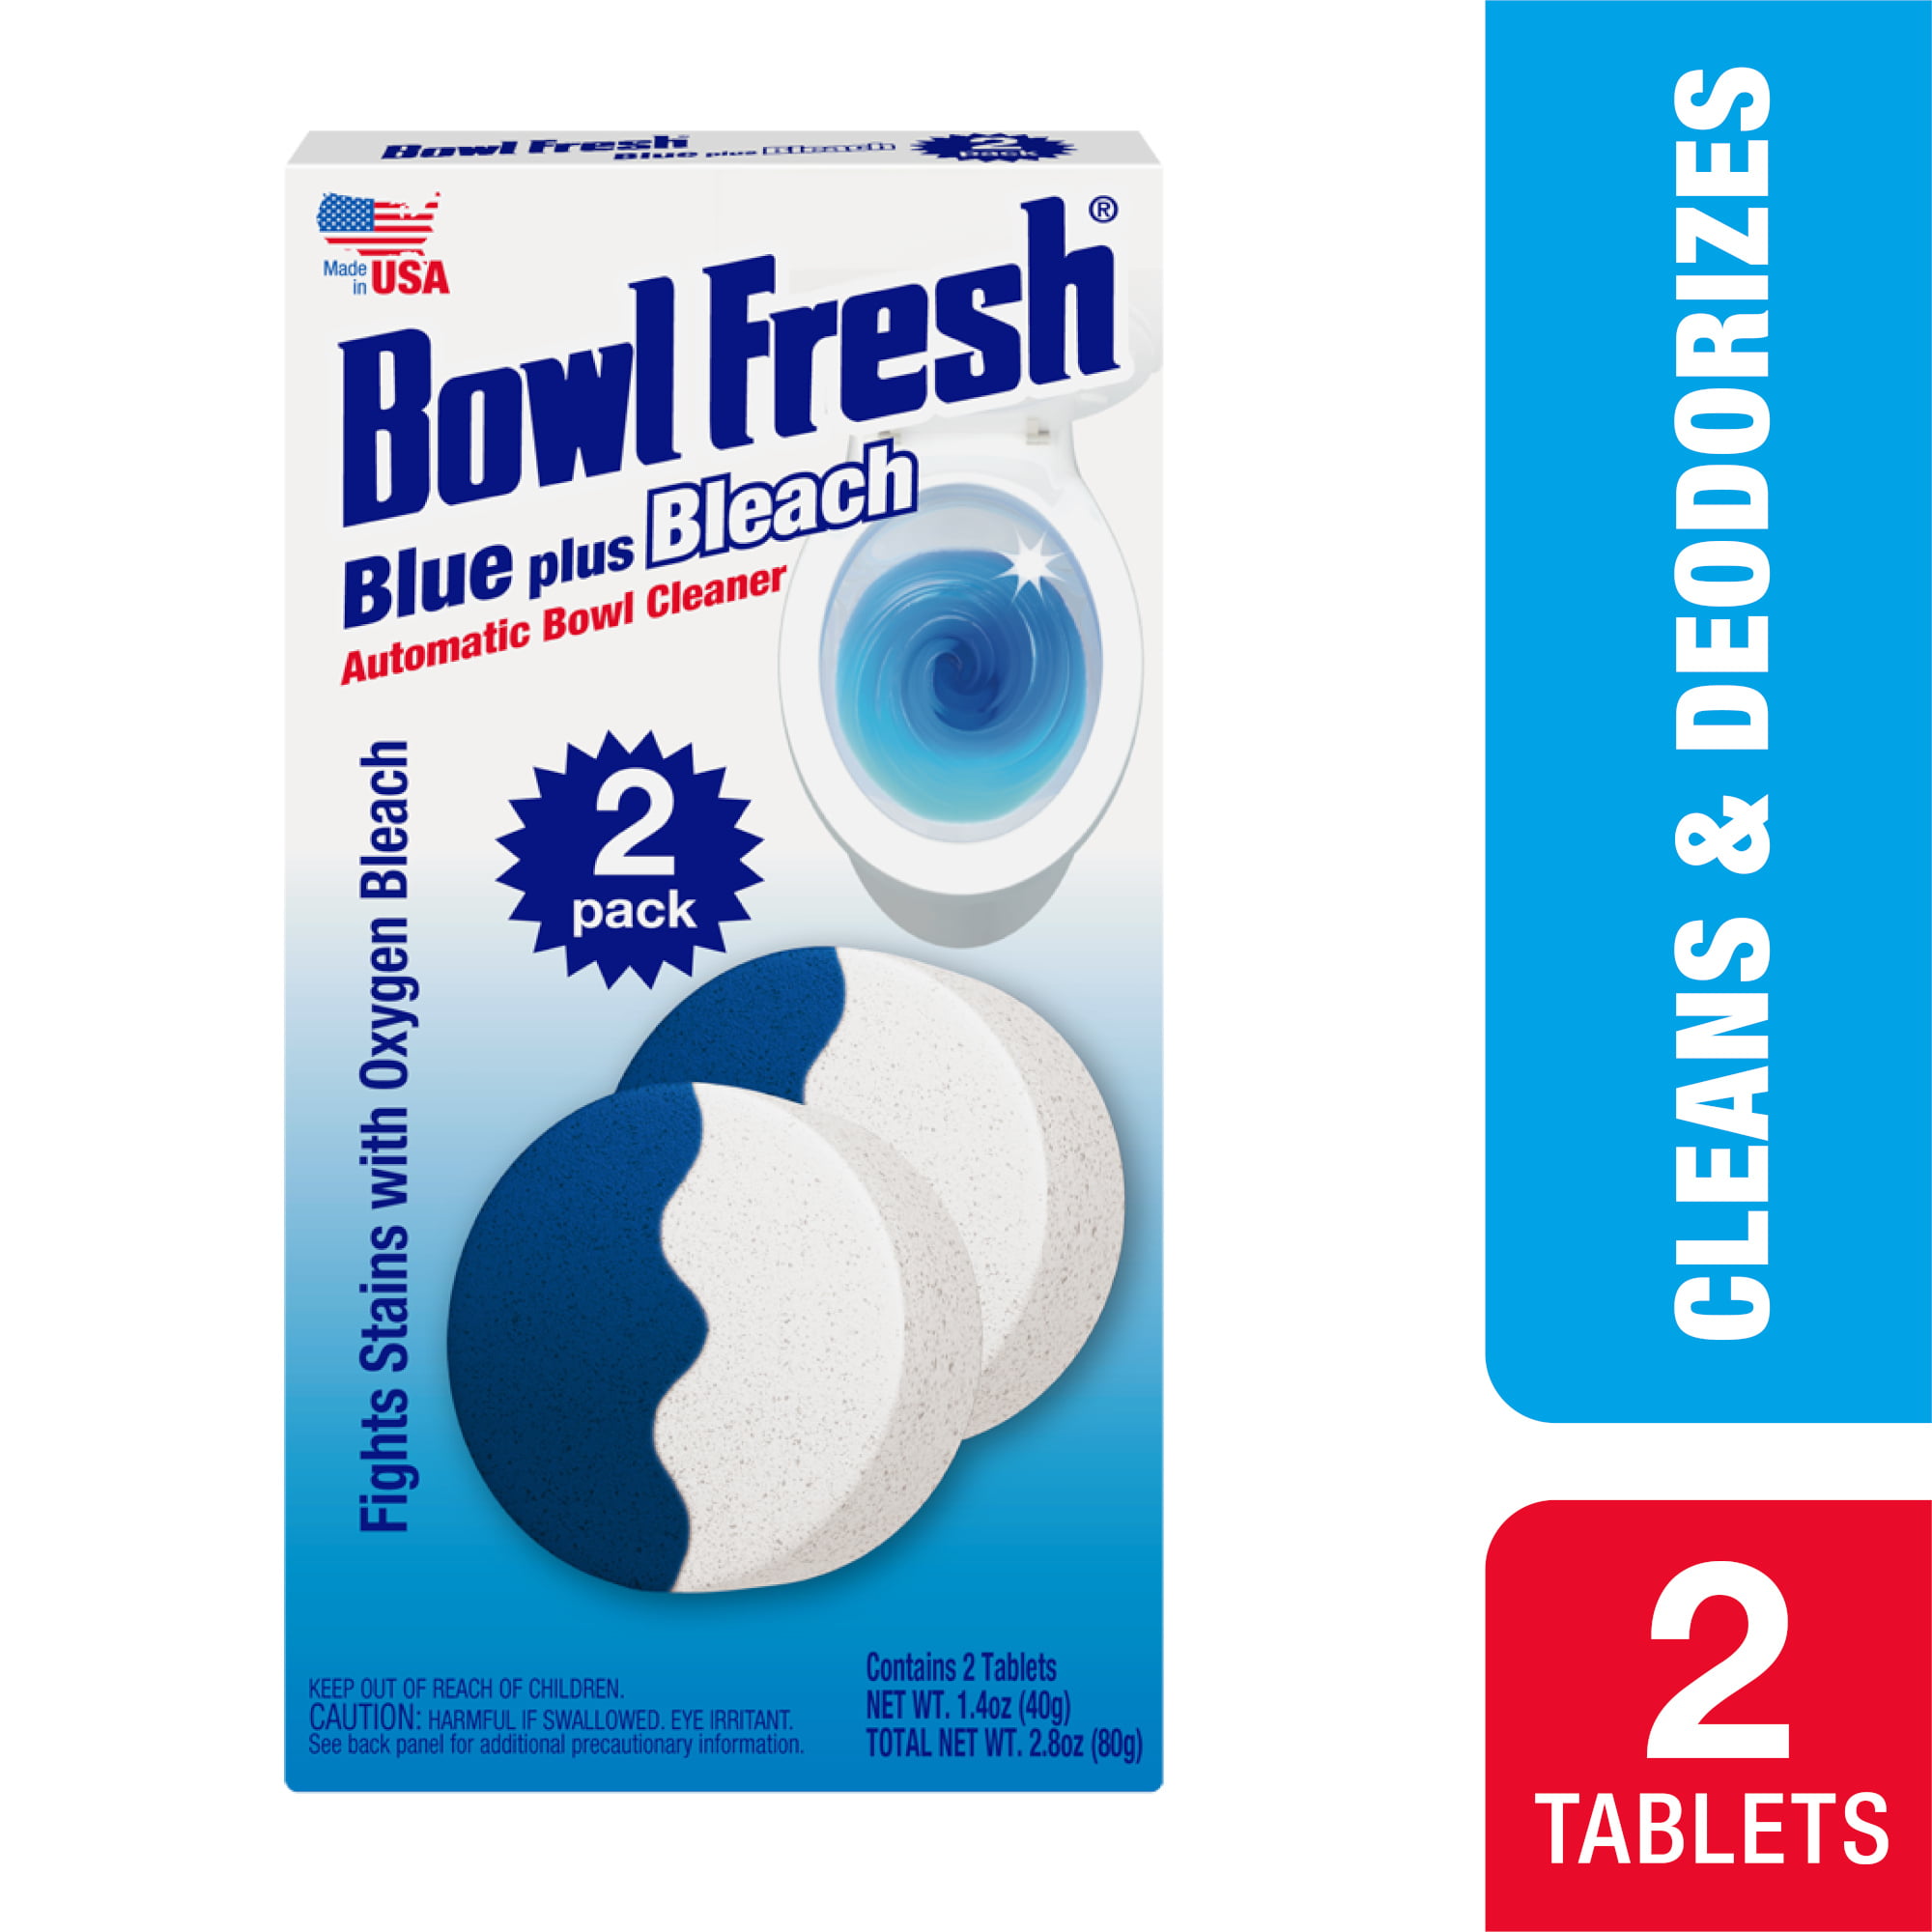 Bowl Fresh Automatic Toilet Bowl Cleaner, Bowl Freshener with Borax and Bleach, 2 Ct